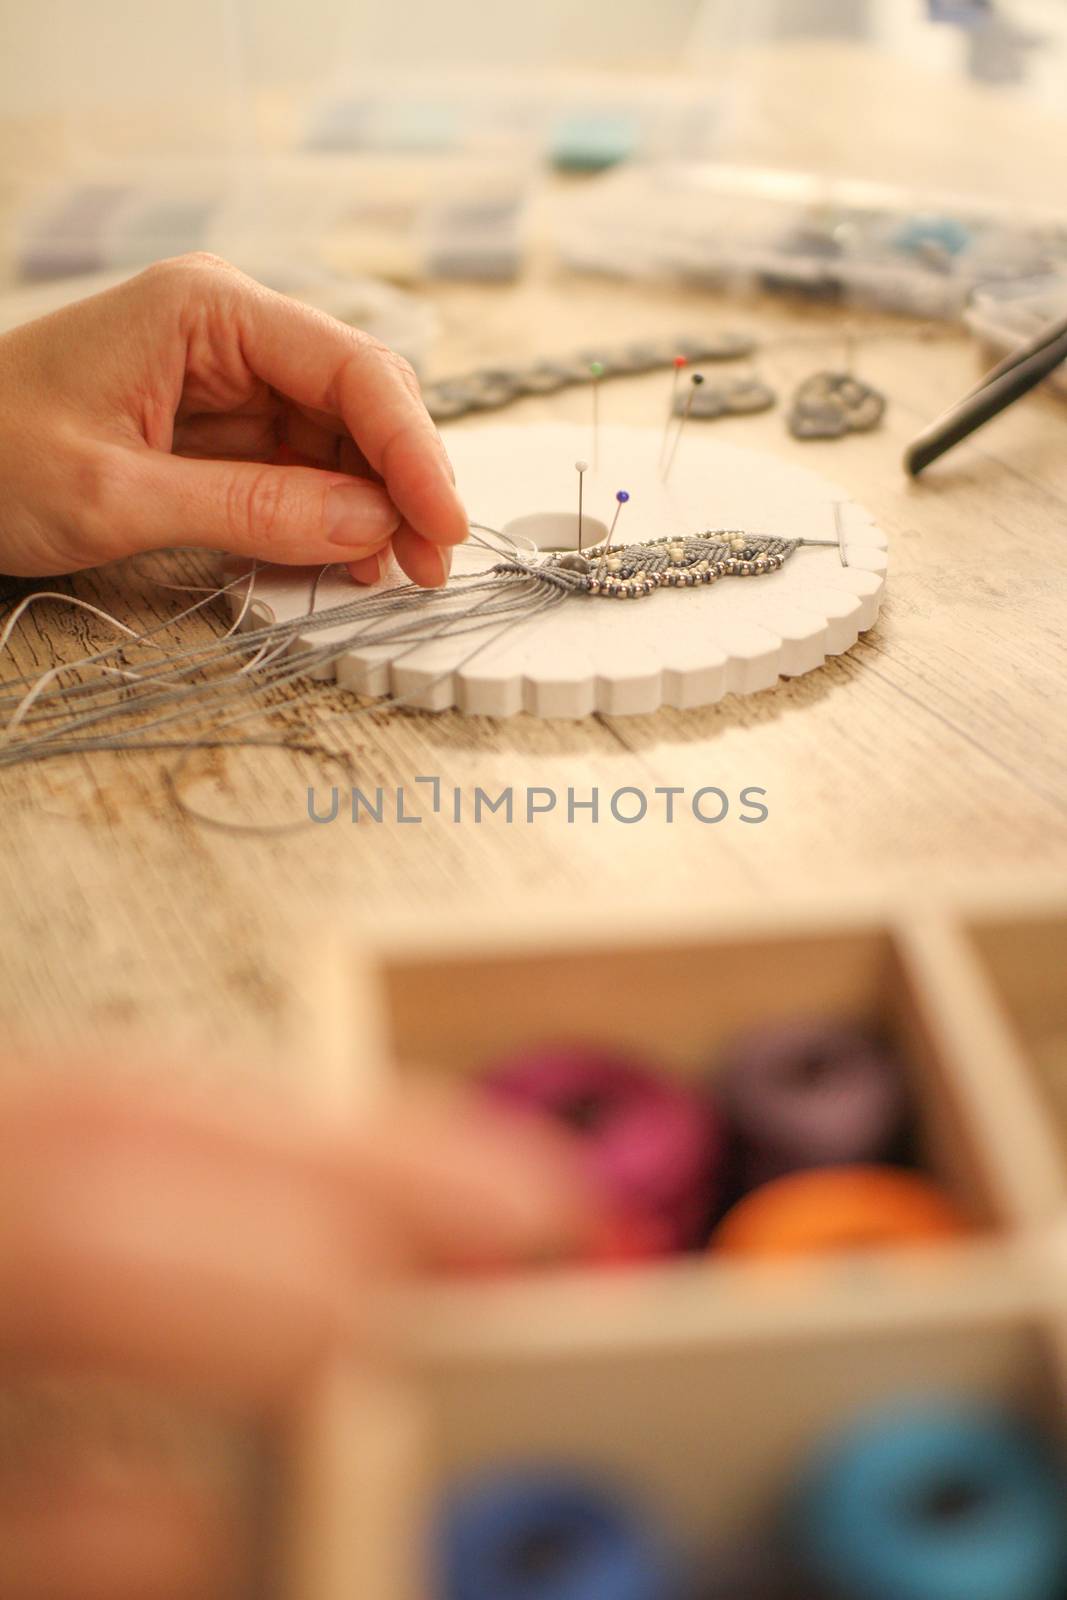 Close up in selective focus of female hands making a macramé bracelet with kumihimo on a wooden table with tools, spools of thread, natural stones and colored beads